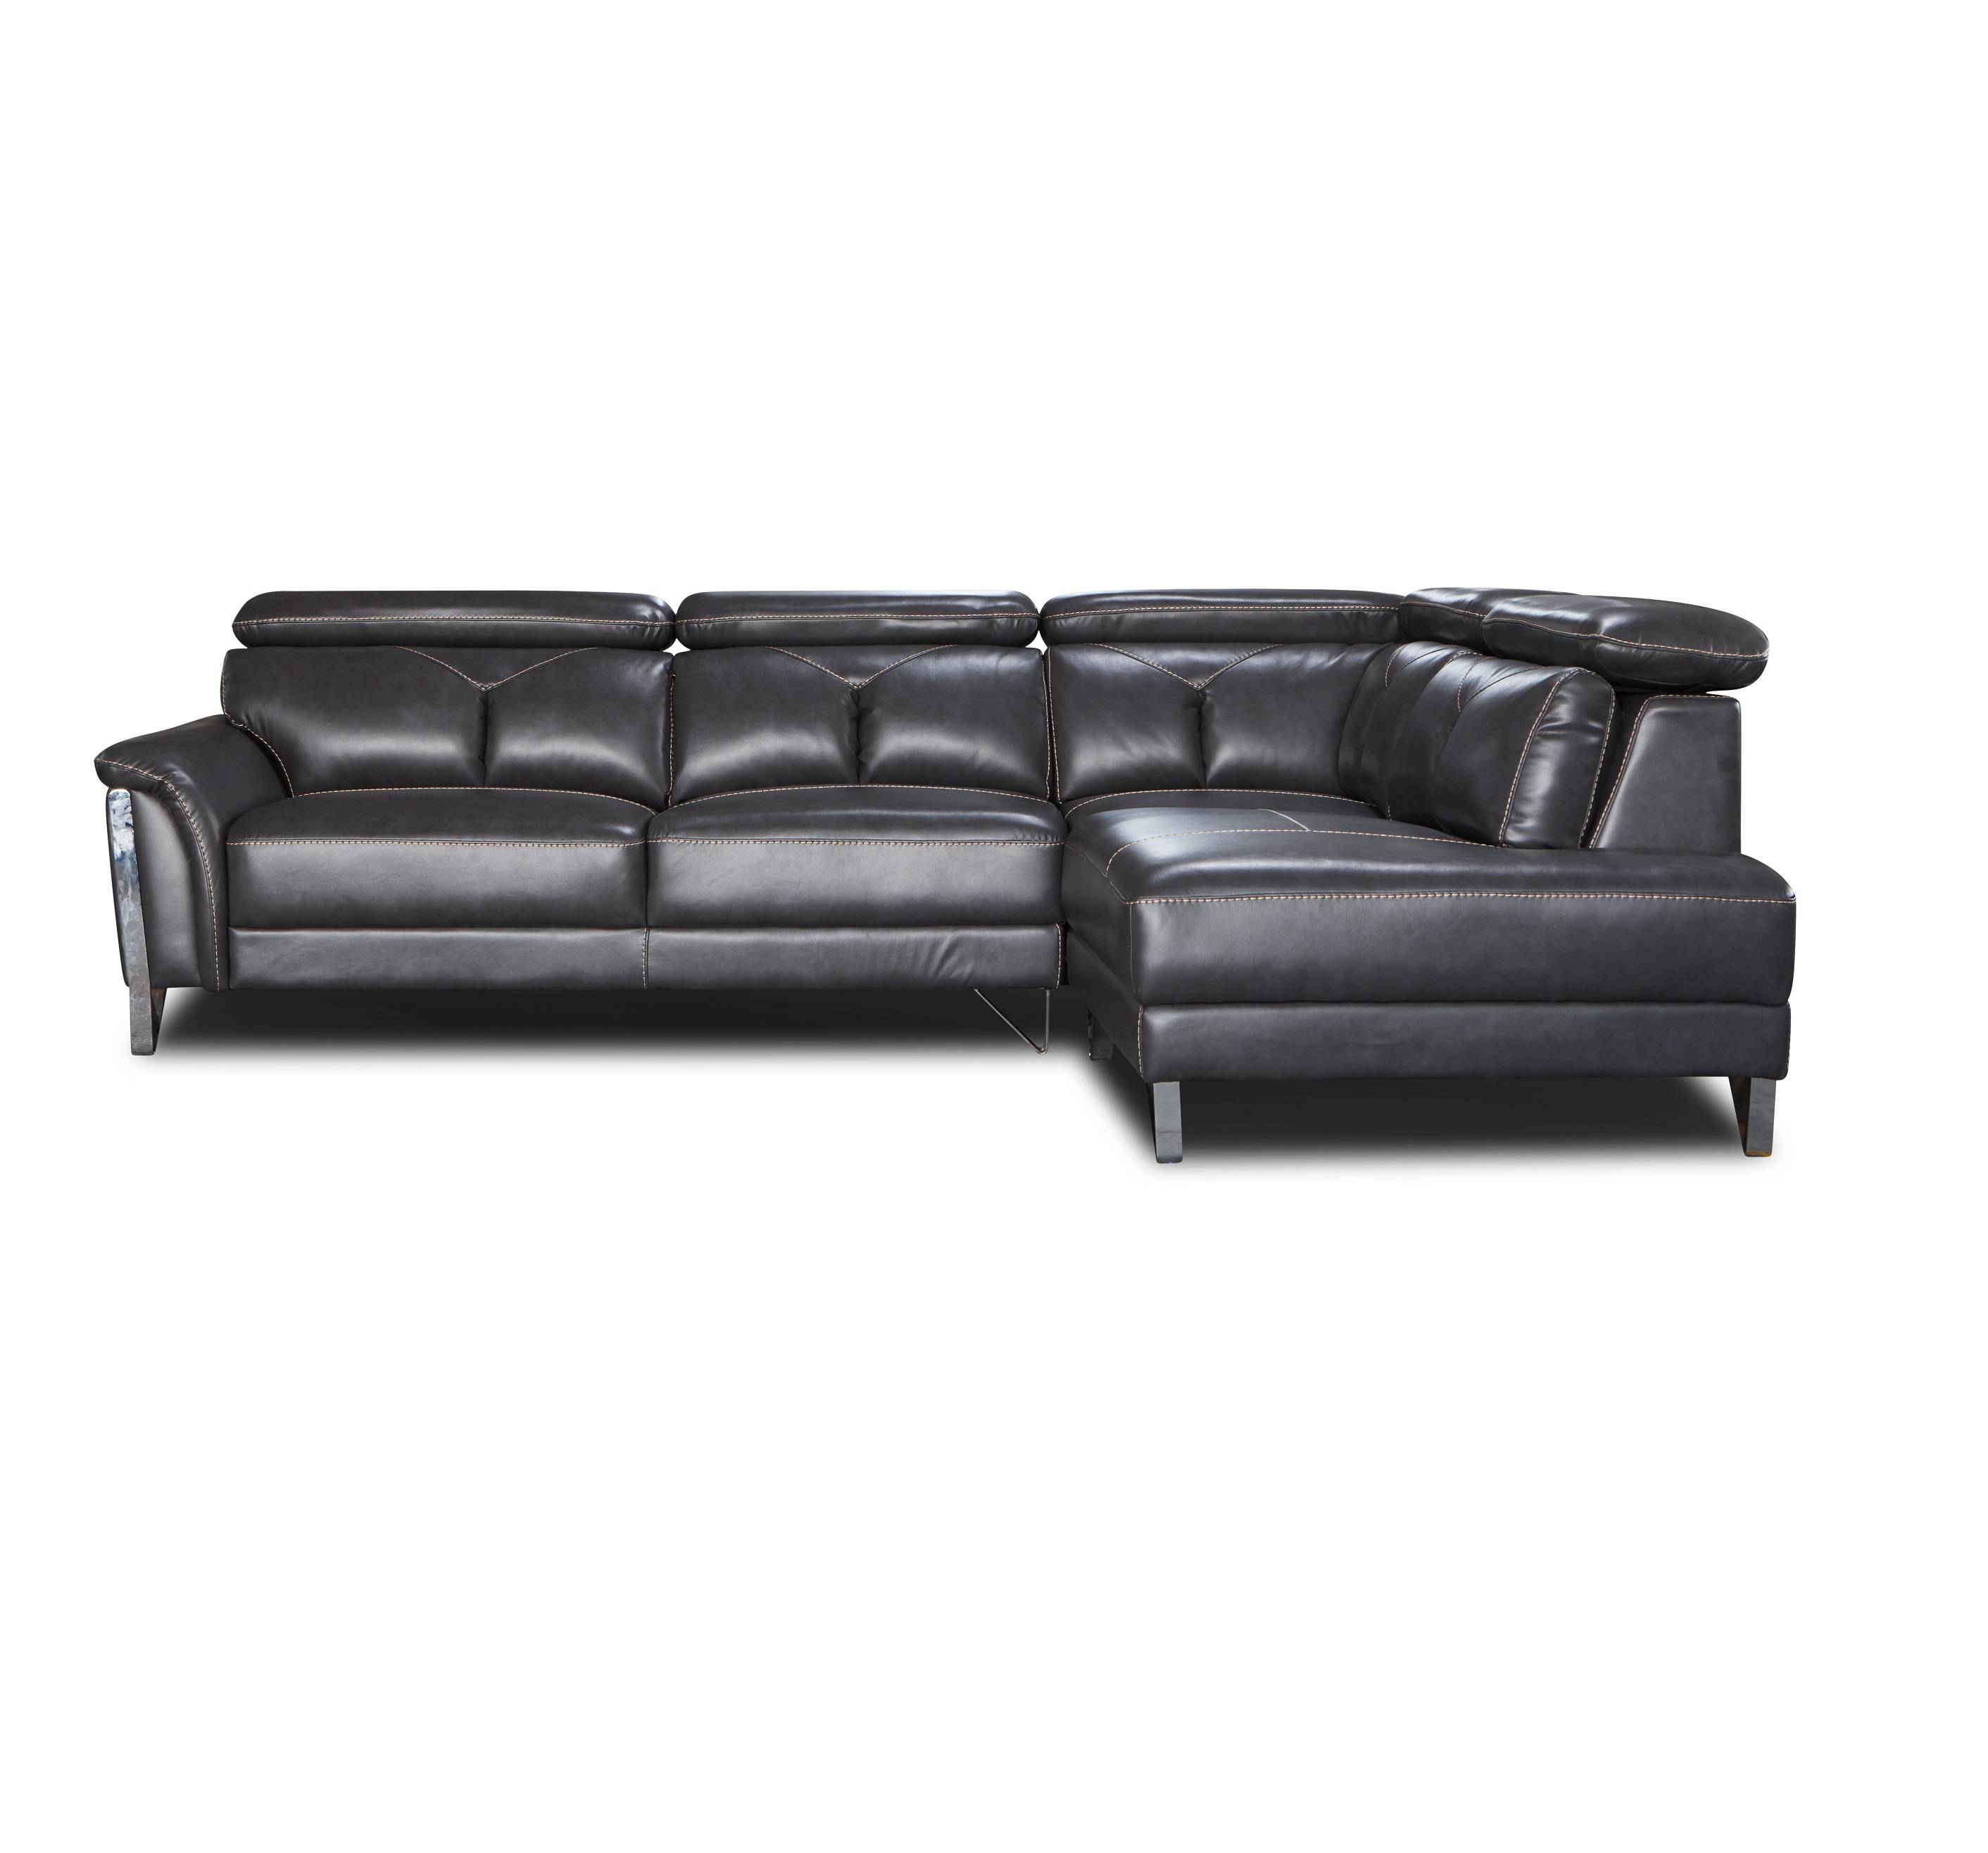 Modern style living room genuine Leather sectional sofa chaise